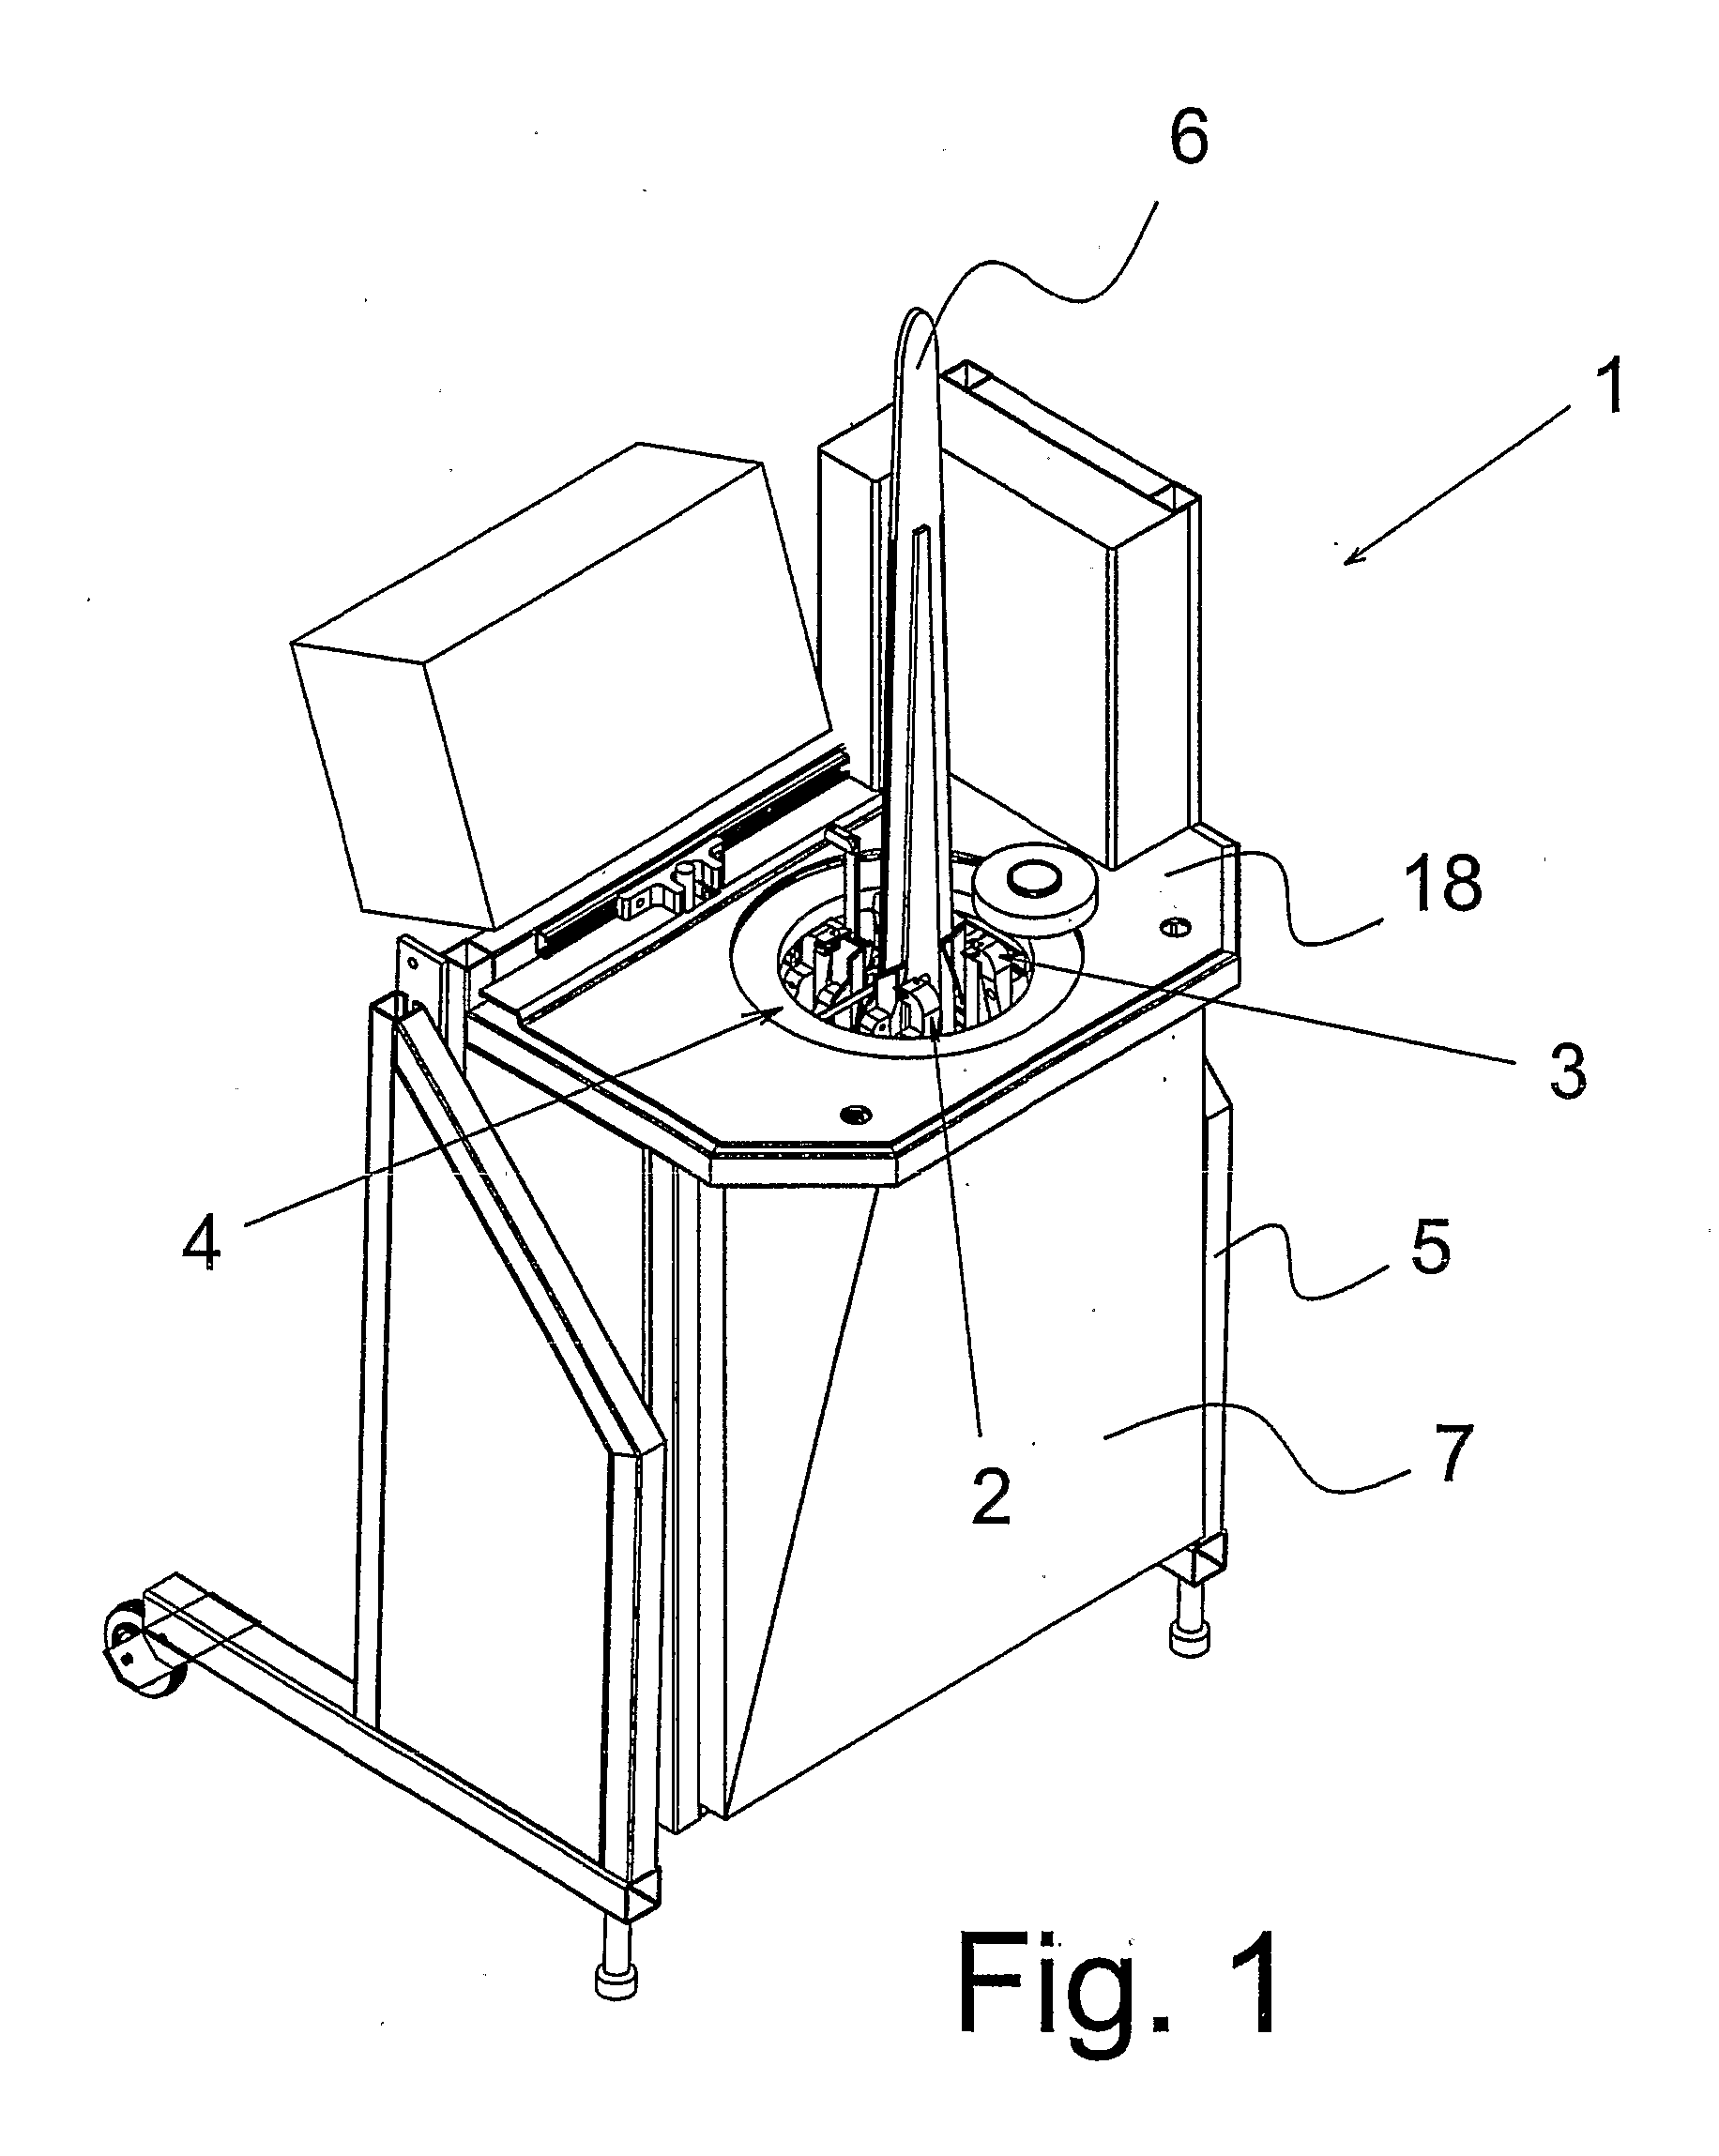 Method And Apparatus For Fastening Fur On A Pelting Board And Winding Material Therefor